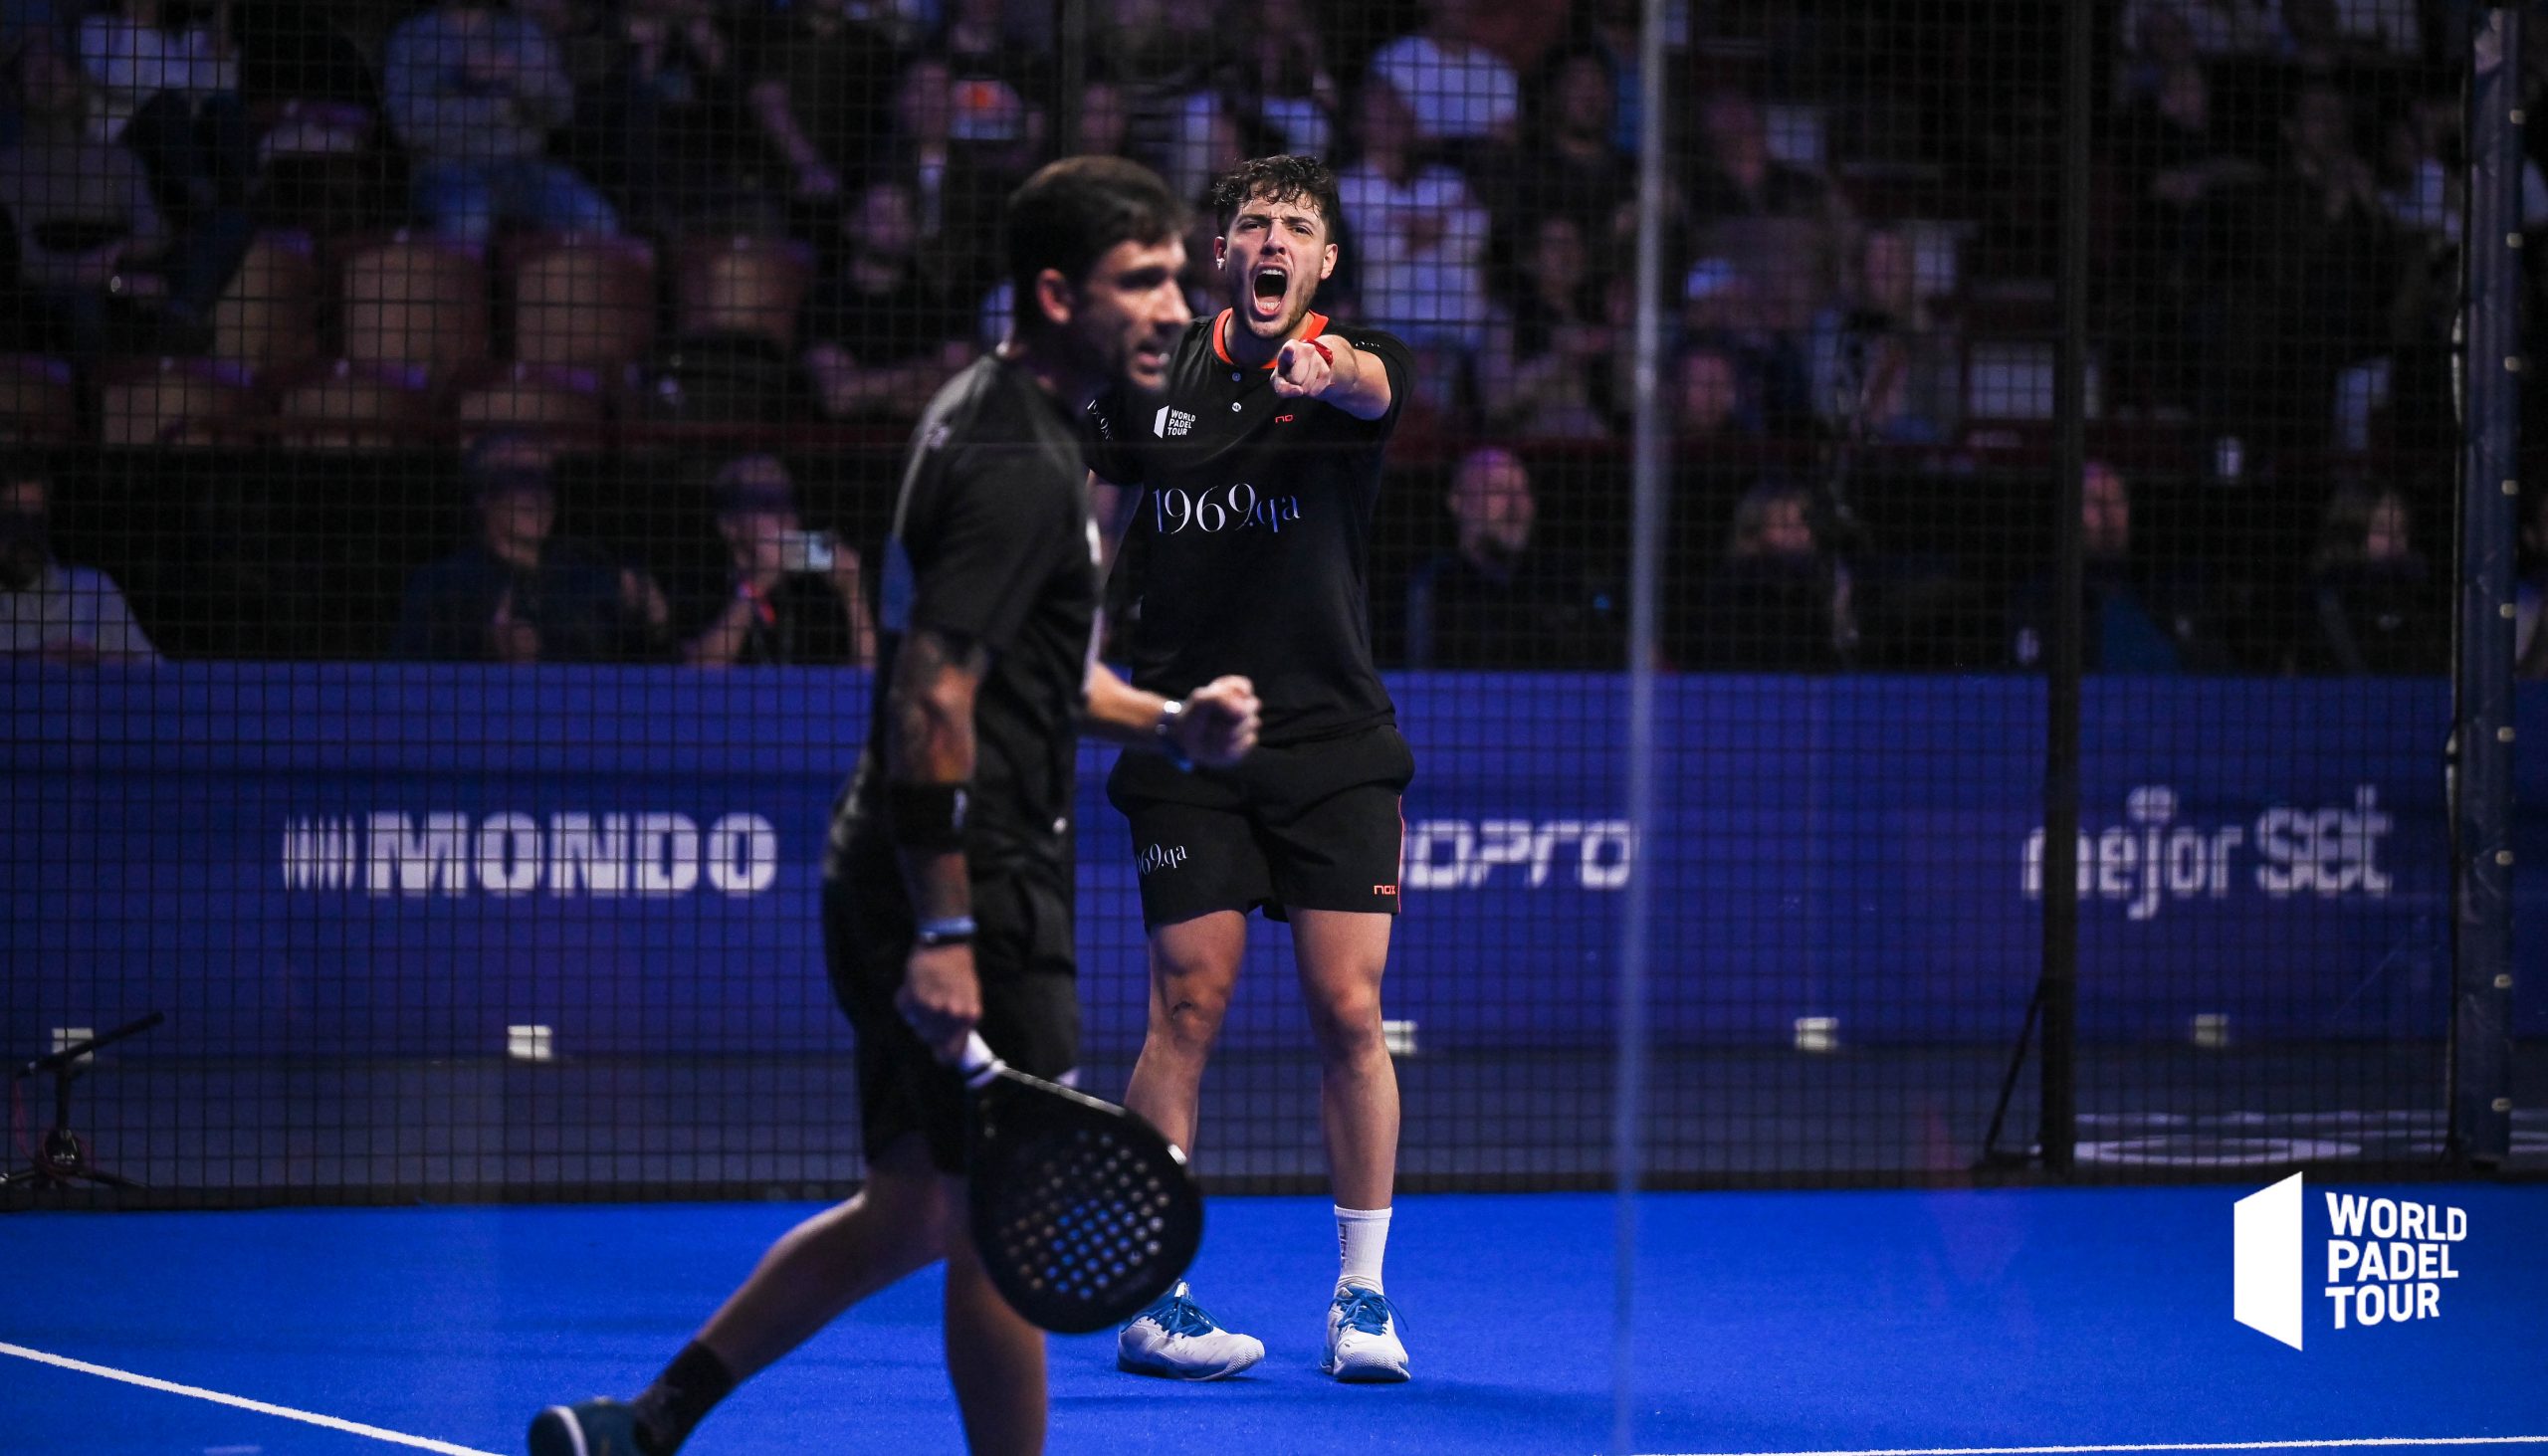 Gutierrez and Tapia return to final after two-month absence to defend Malmö title